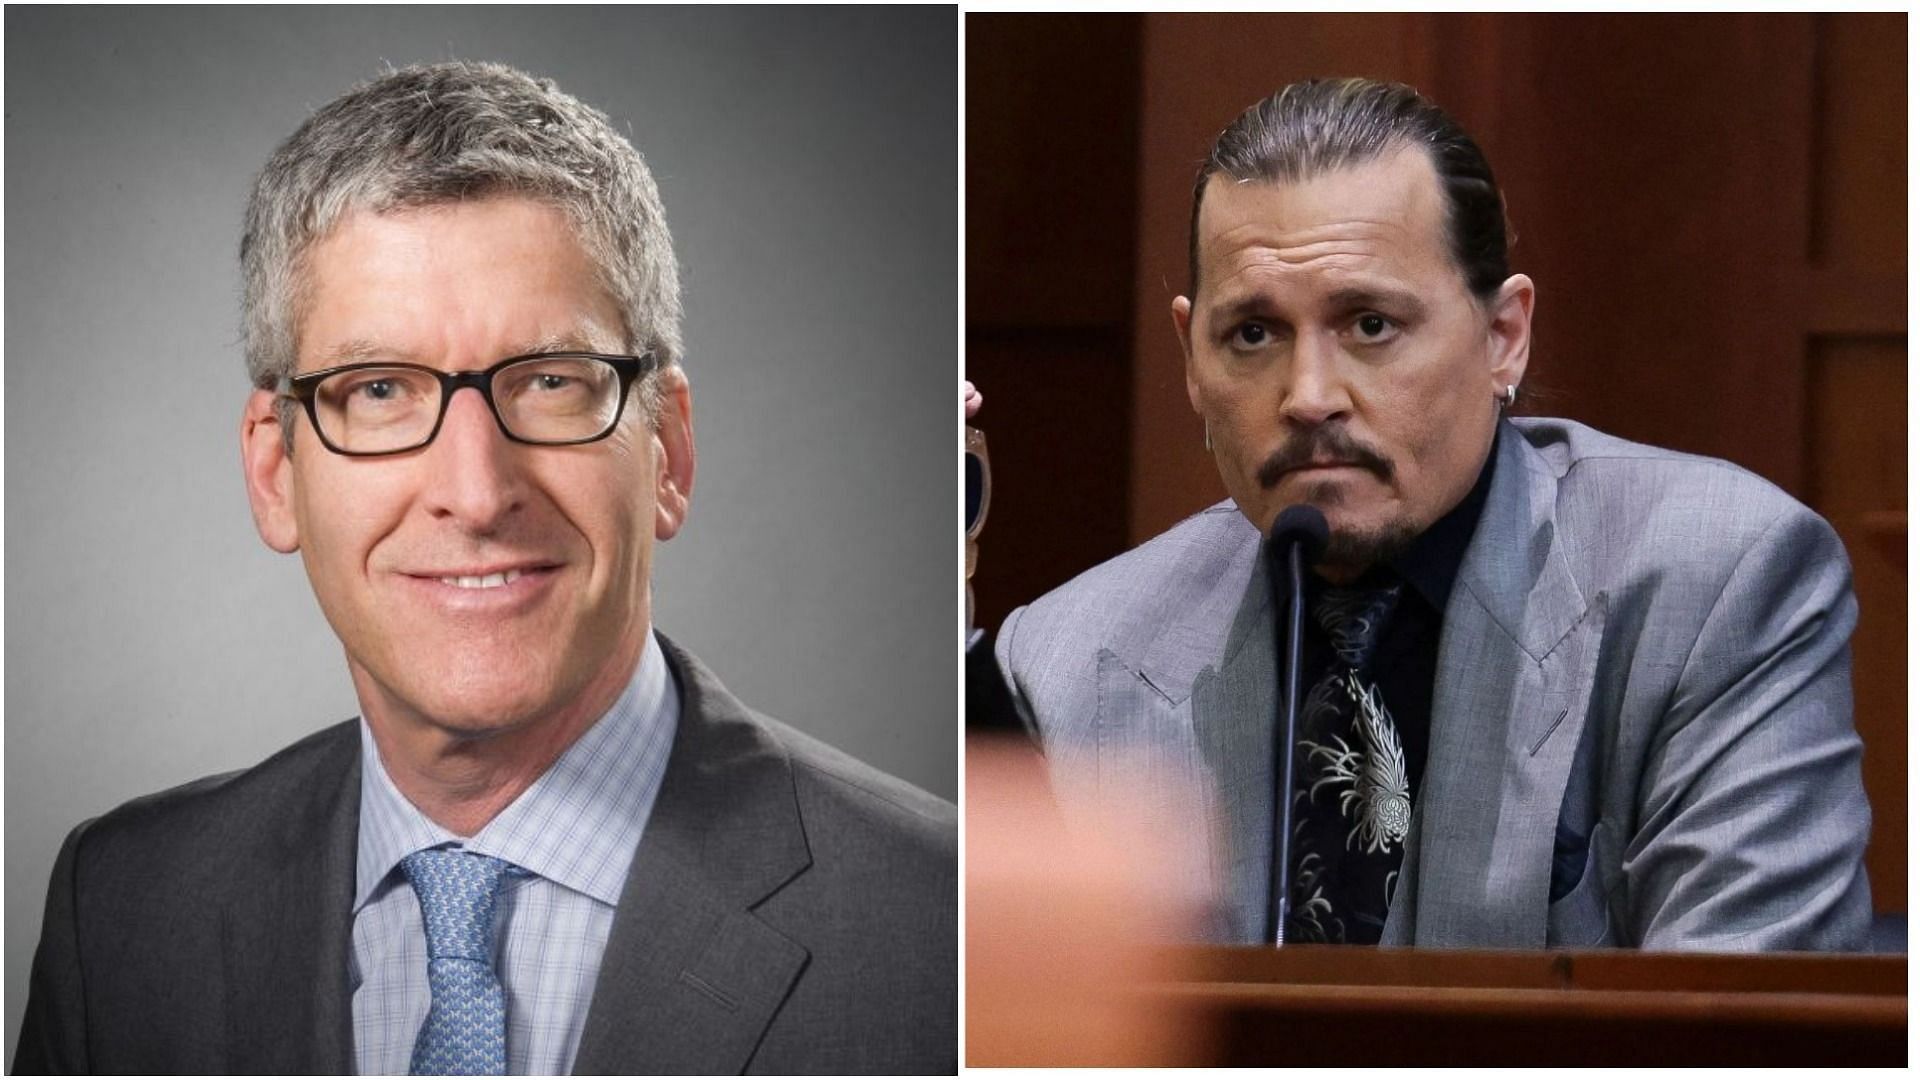 Dr. Richard Gilbert and Johnny Depp in the trial (Image via richardsgilbertmd.com, and Evelyn Hockstein/AFP/Getty Images)